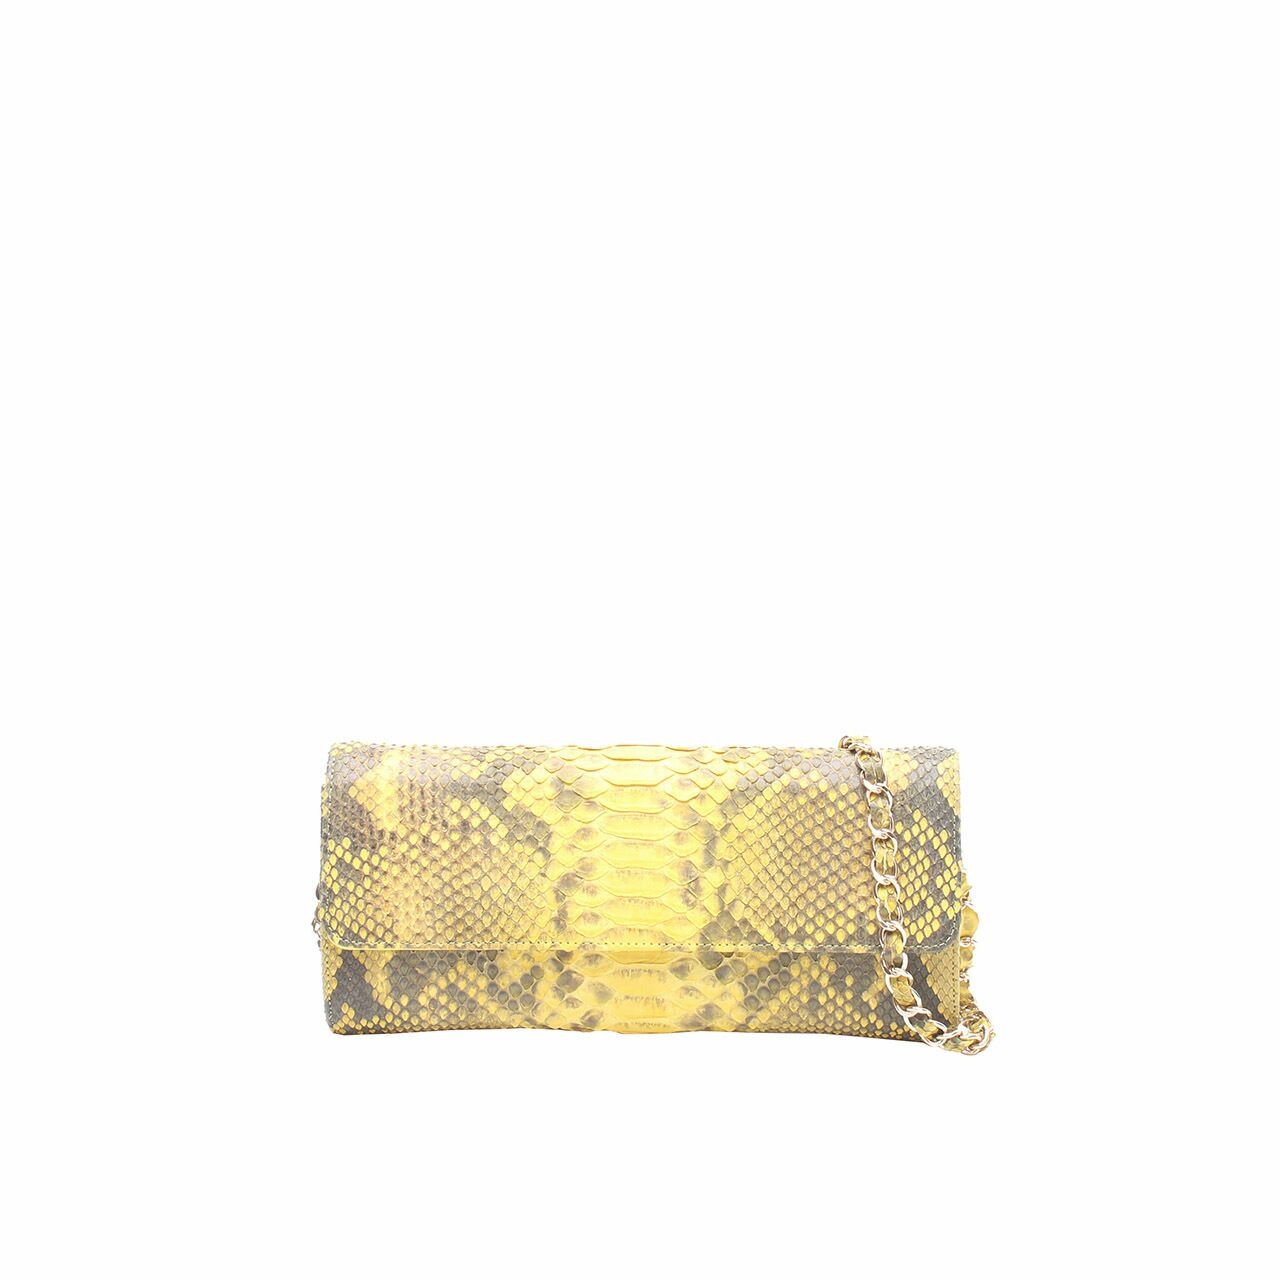 Private Collection Yellow Snake Skin Clutch